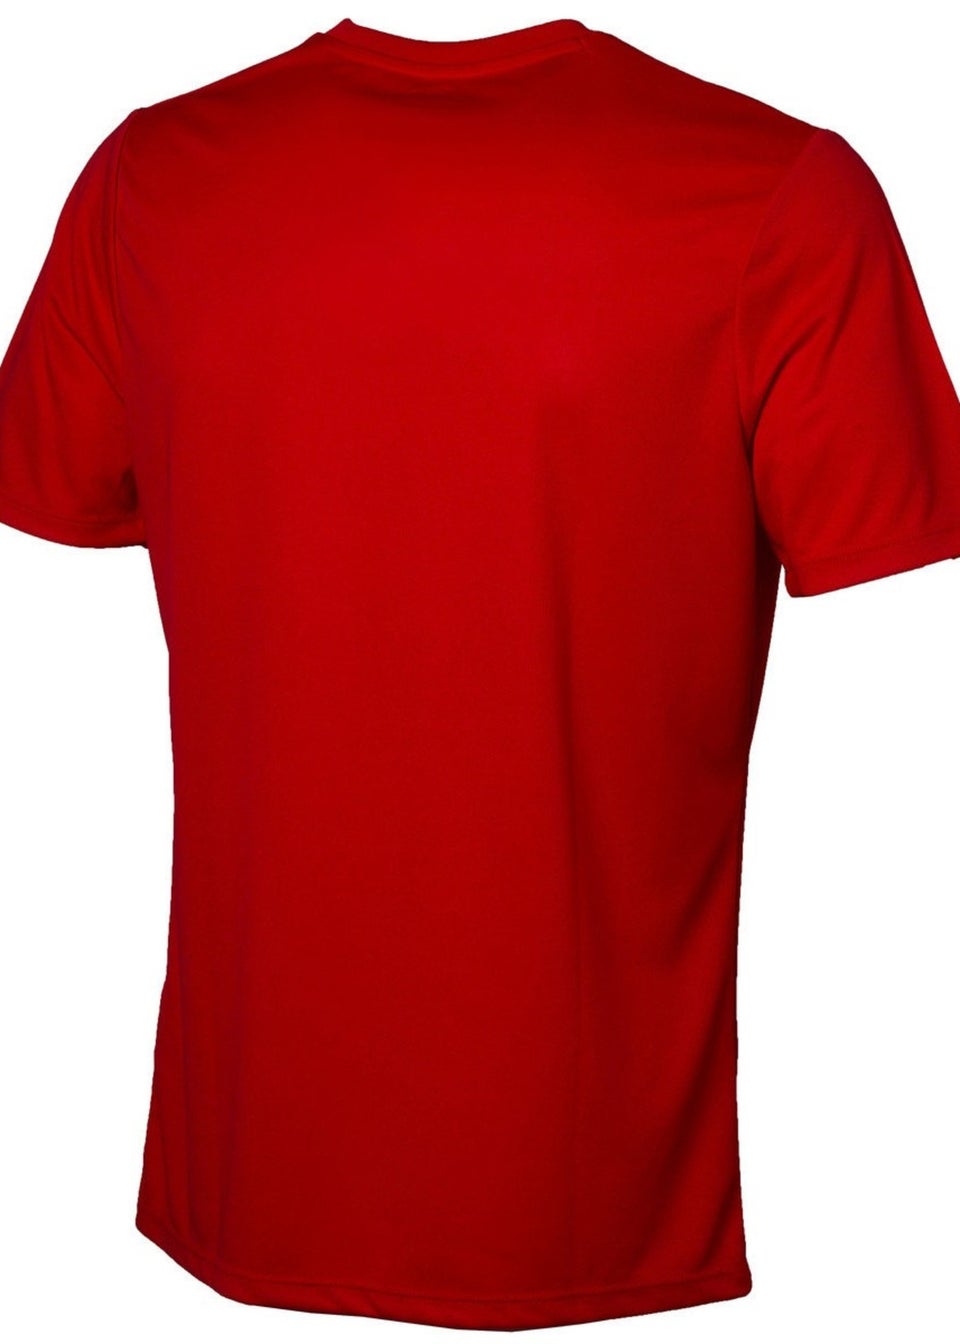 Umbro Red Club Short-Sleeved Jersey